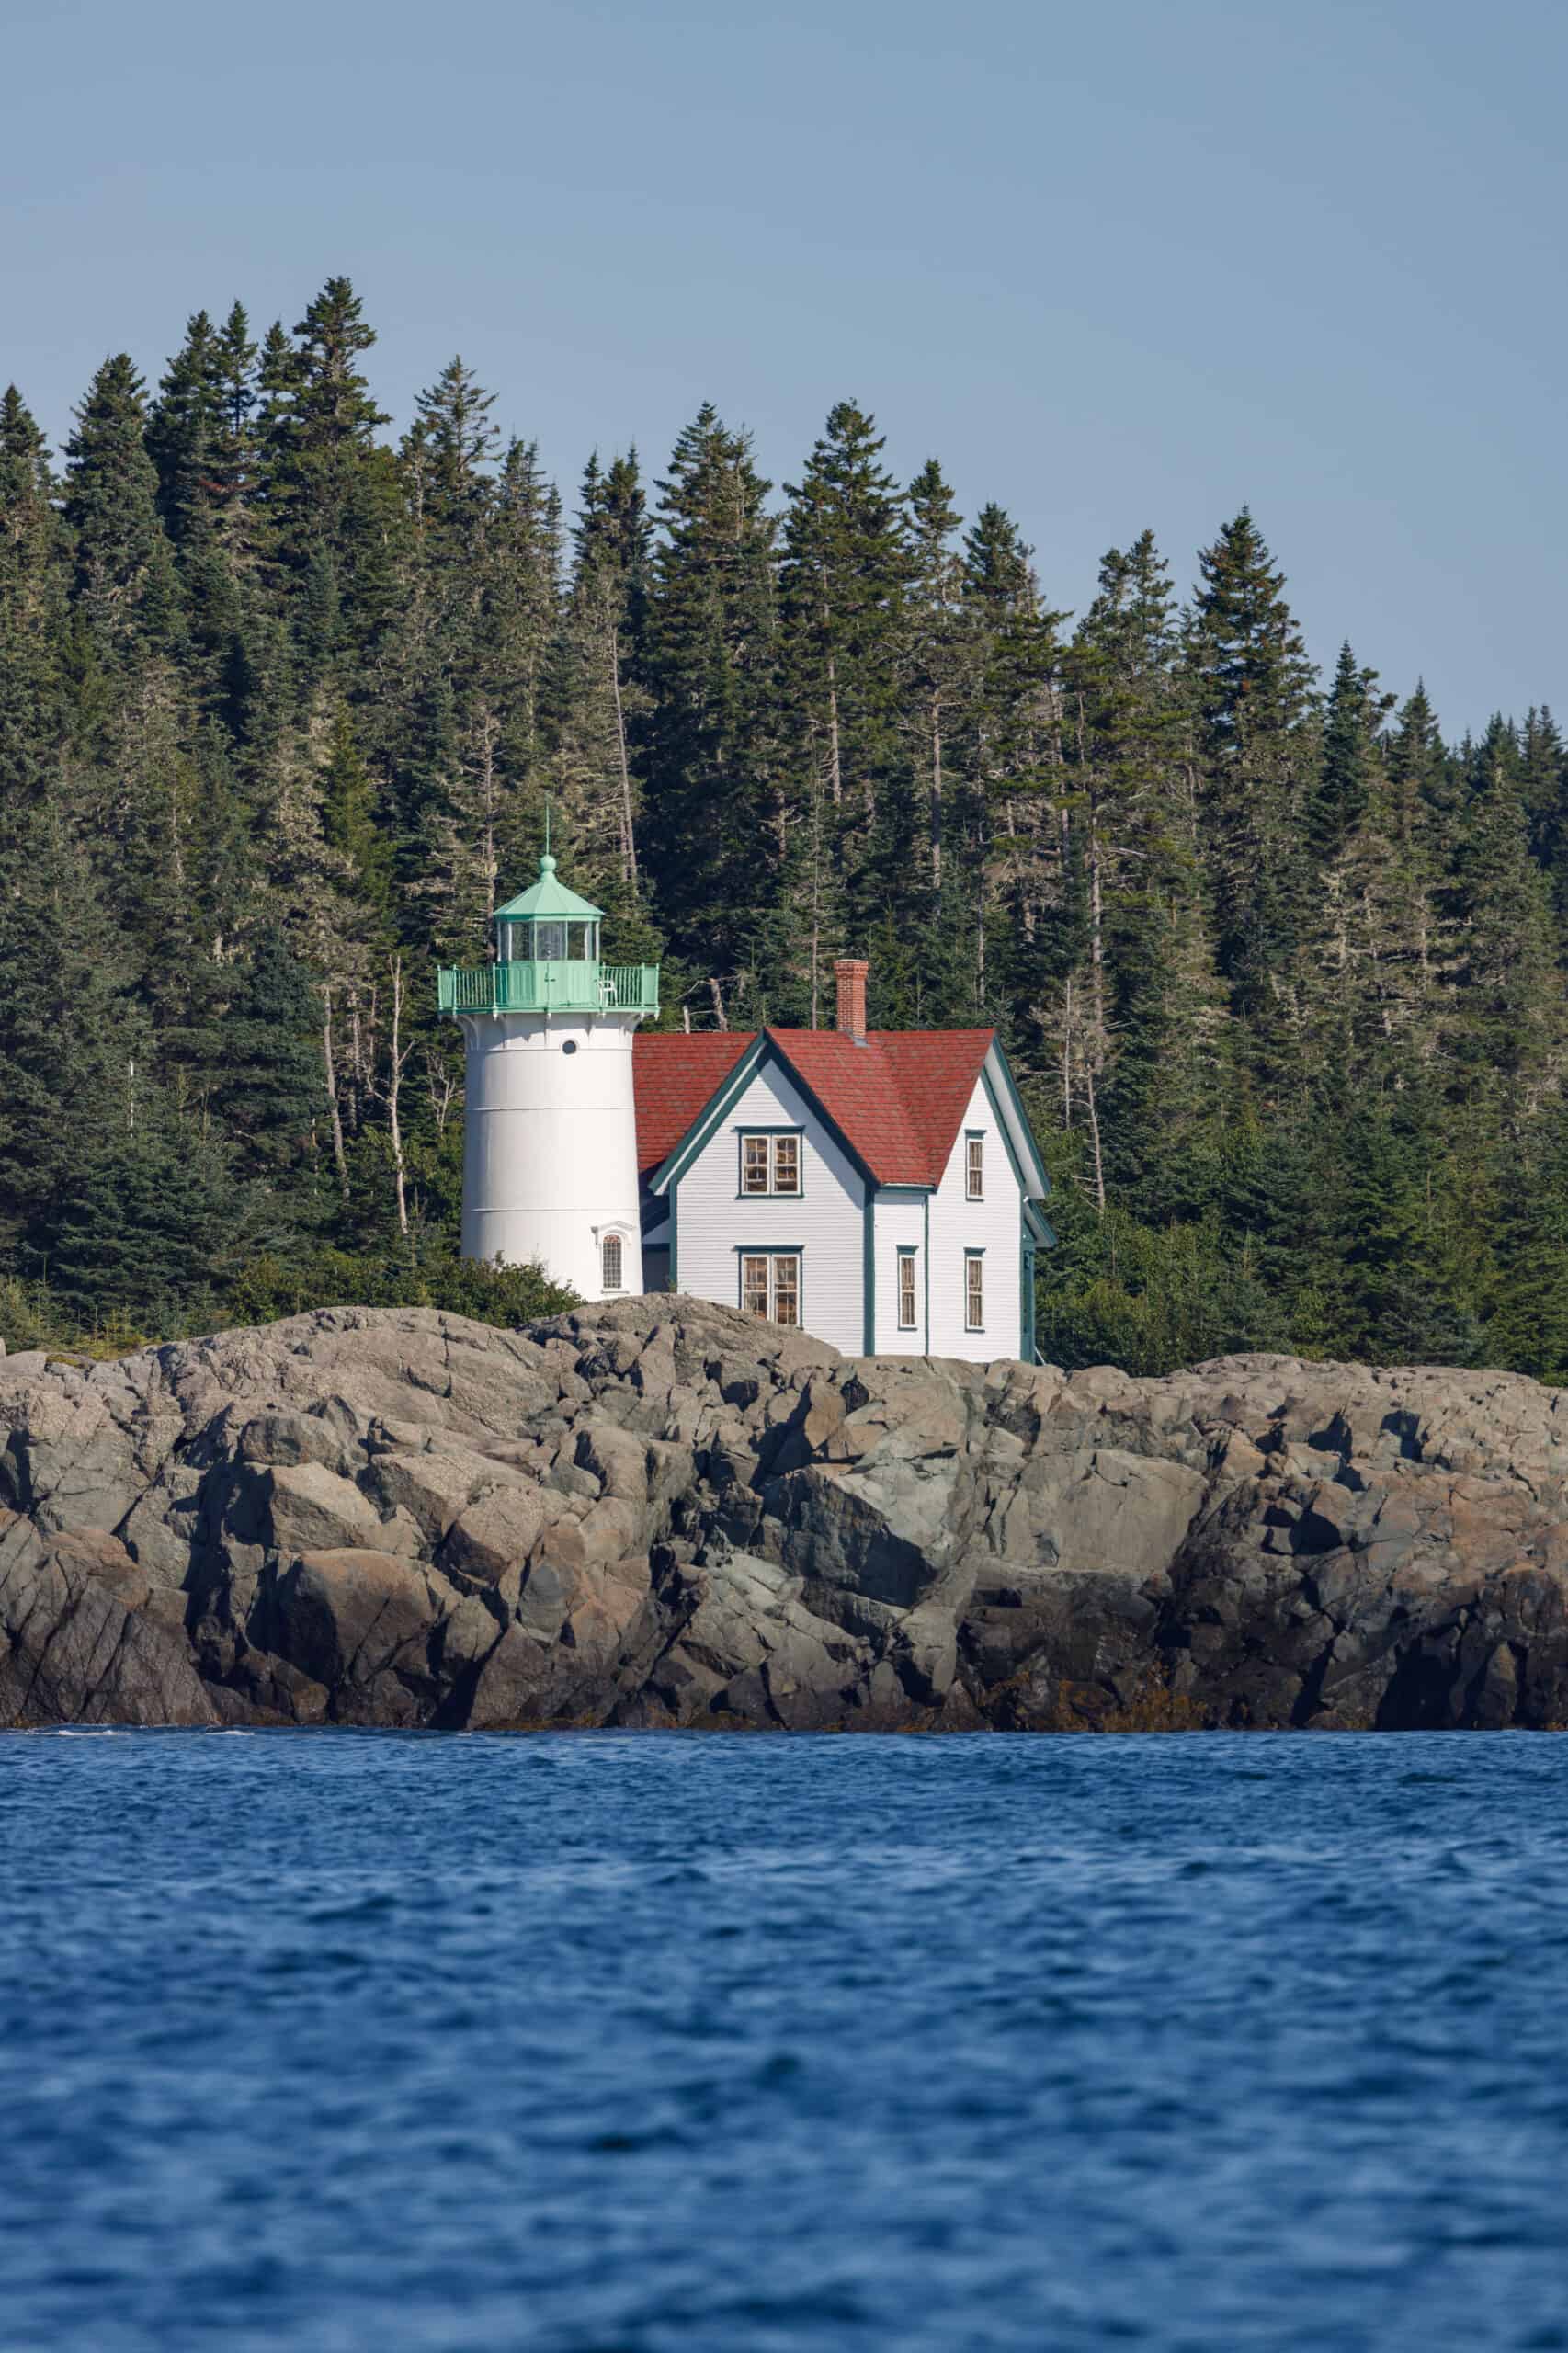 Lighthouse and lighthouse keepers house on rocky island in Maine with tall evergreen trees and blue skies behind it